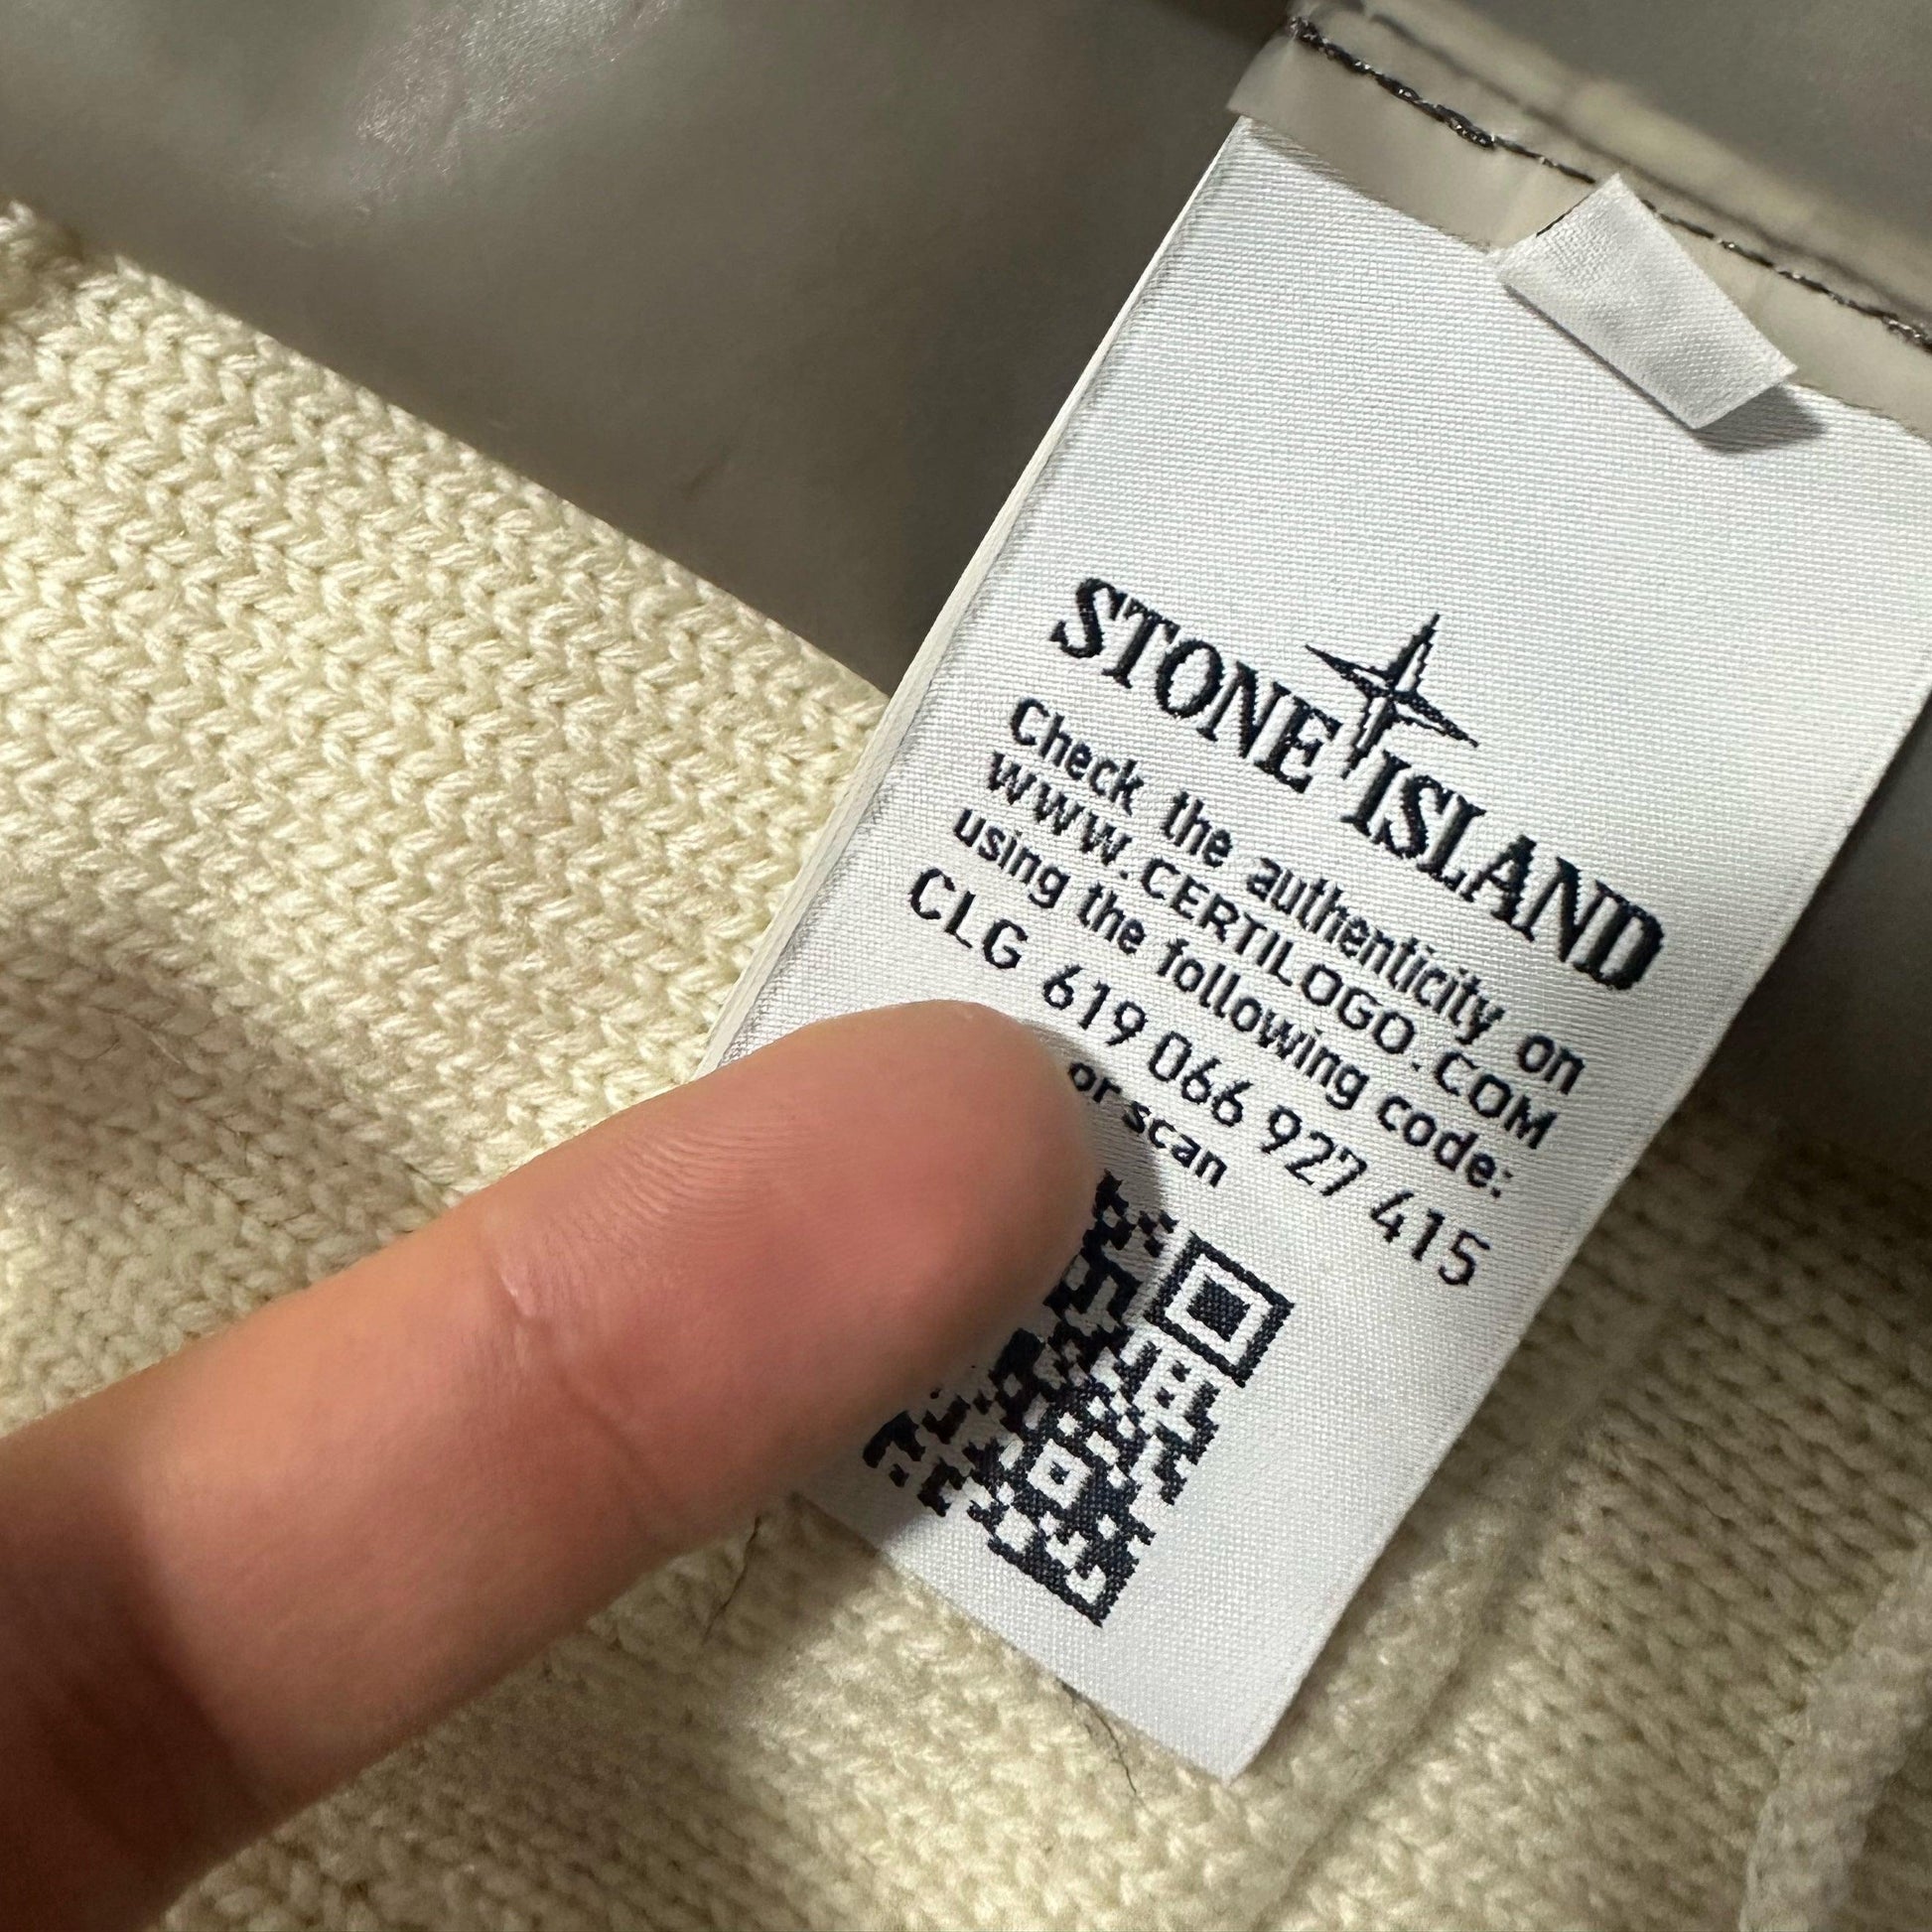 Stone Island Poly Cover Composite Jacket with Knit Inner - Known Source